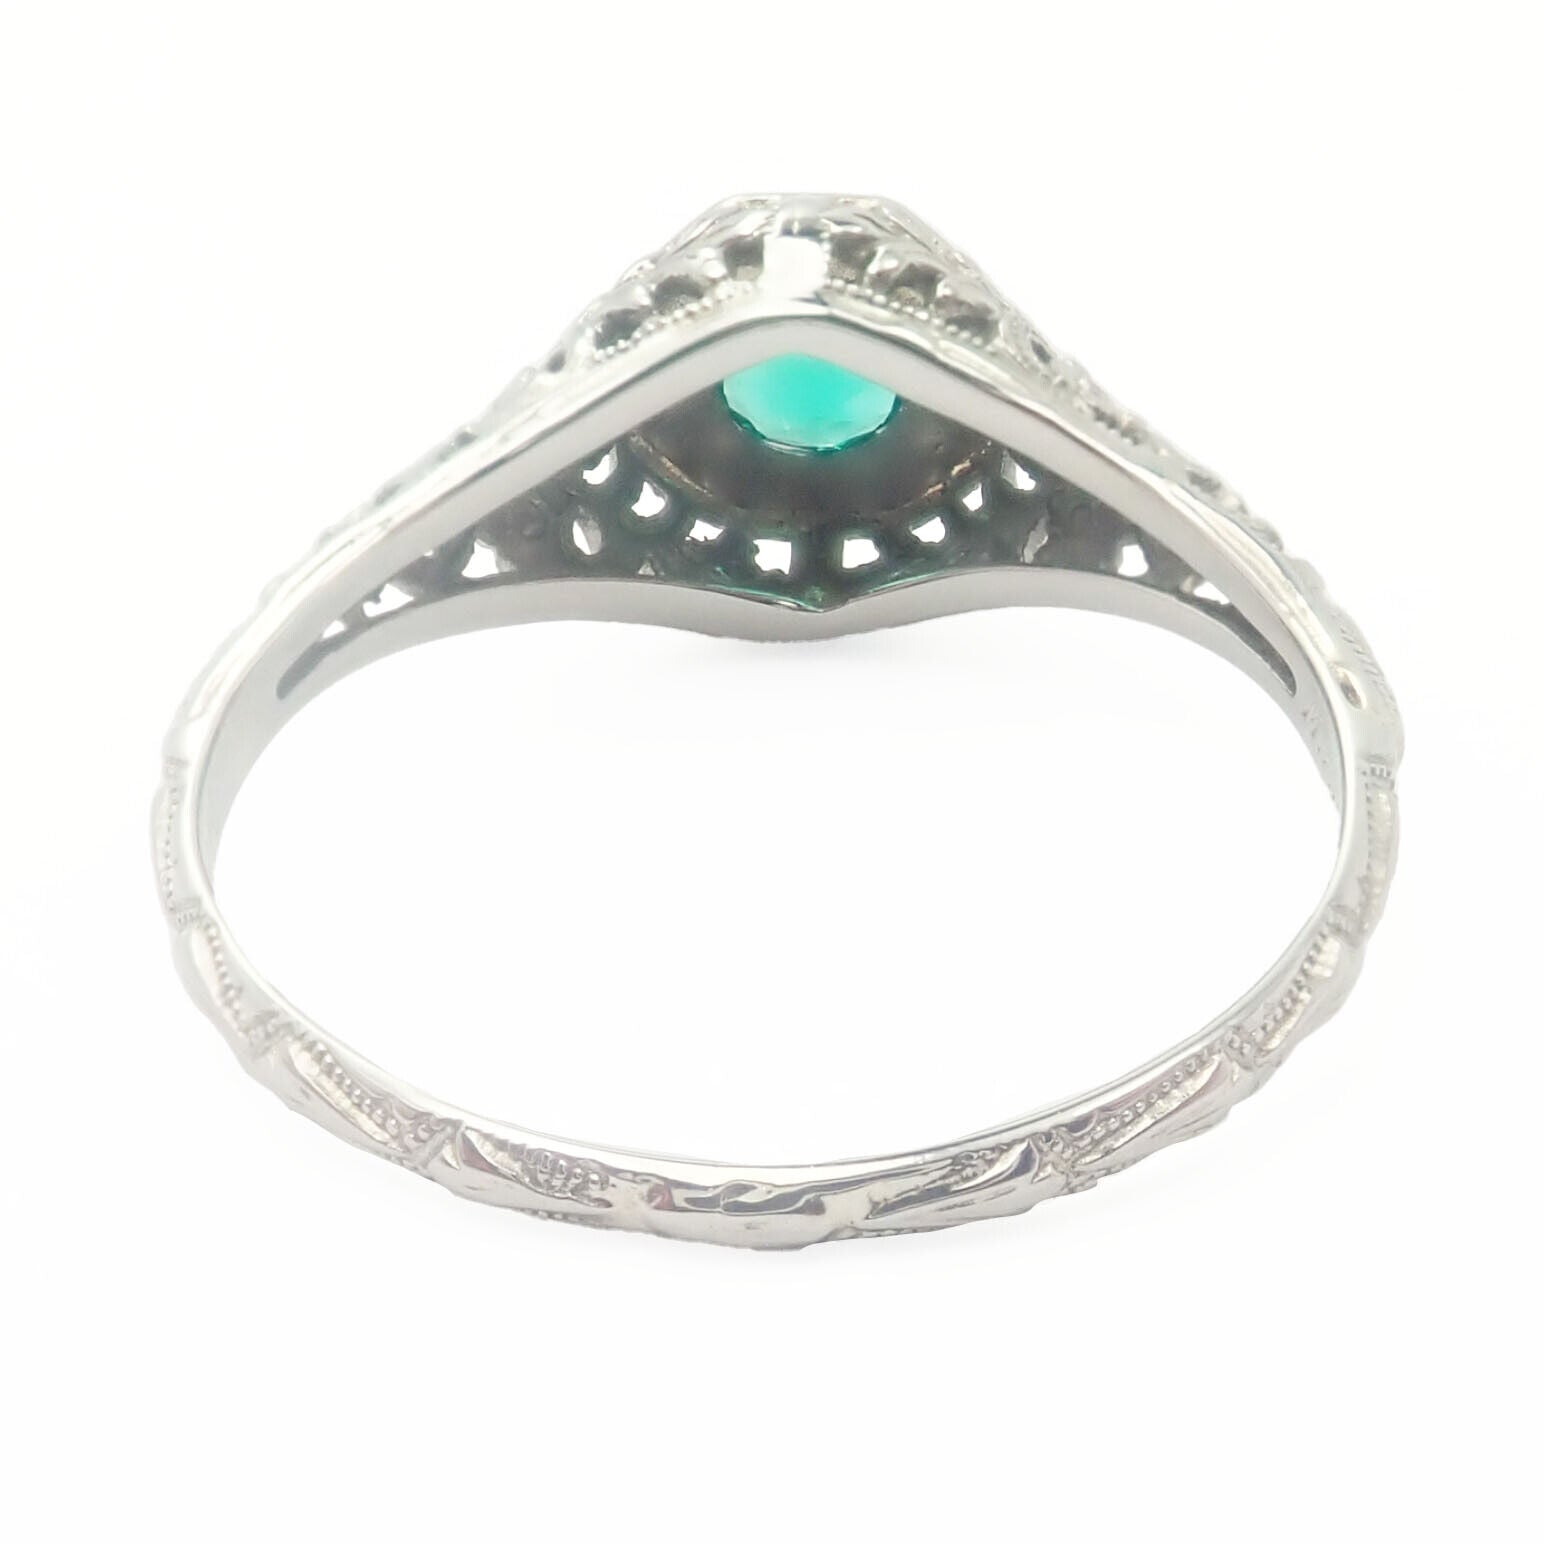 Estate Jewelry & Watches:Vintage & Antique Jewelry:Rings Vintage Estate 18k White Gold Emerald Art Deco Filigree Ring